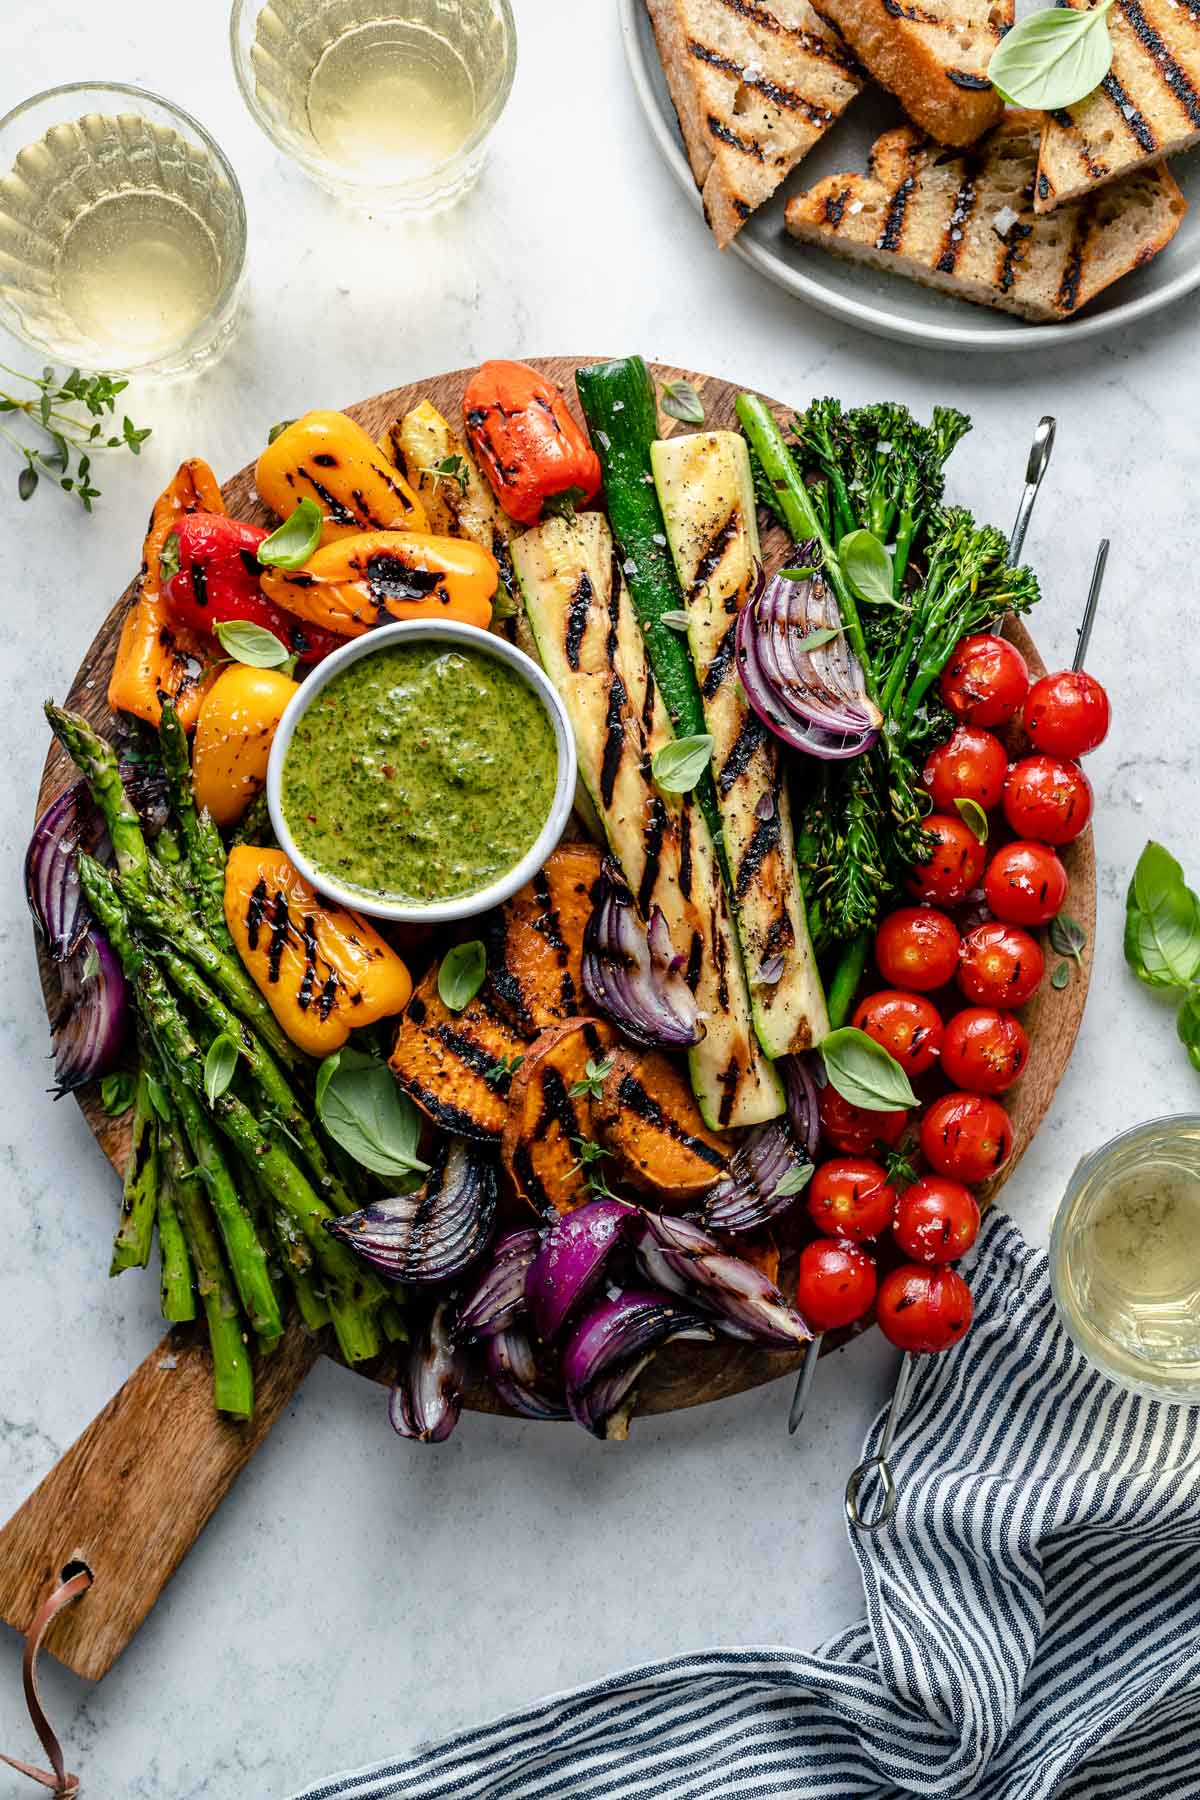 https://playswellwithbutter.com/wp-content/uploads/2021/05/Grilled-Vegetable-Platter-with-Chimichurri-7.jpg